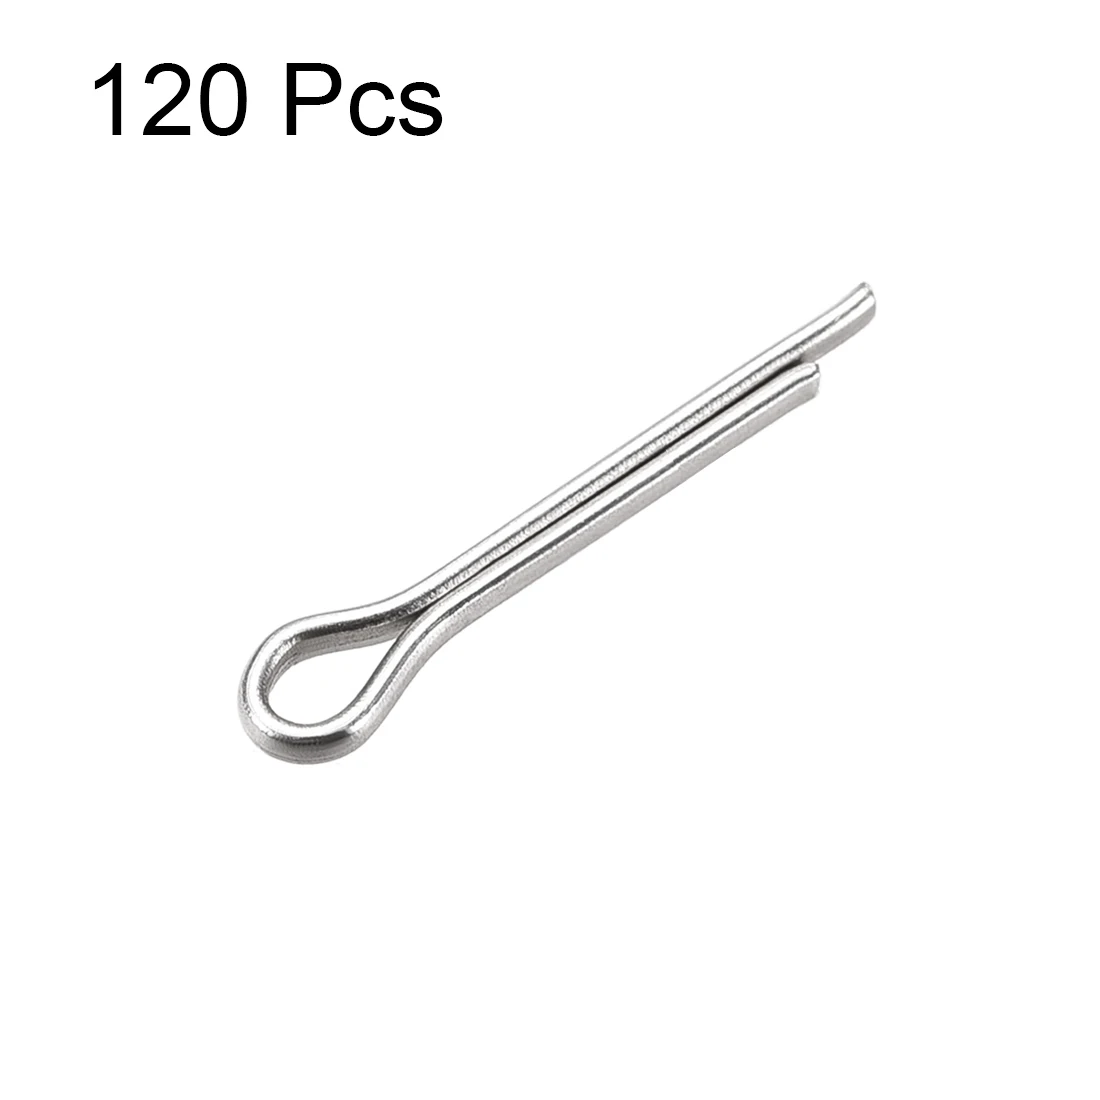 

uxcell 120Pcs Split Cotter Pin - 1.5mm x 10mm 304 Stainless Steel 2-Prongs Silver Tone for Secure Clevis Pins,Castle Nuts